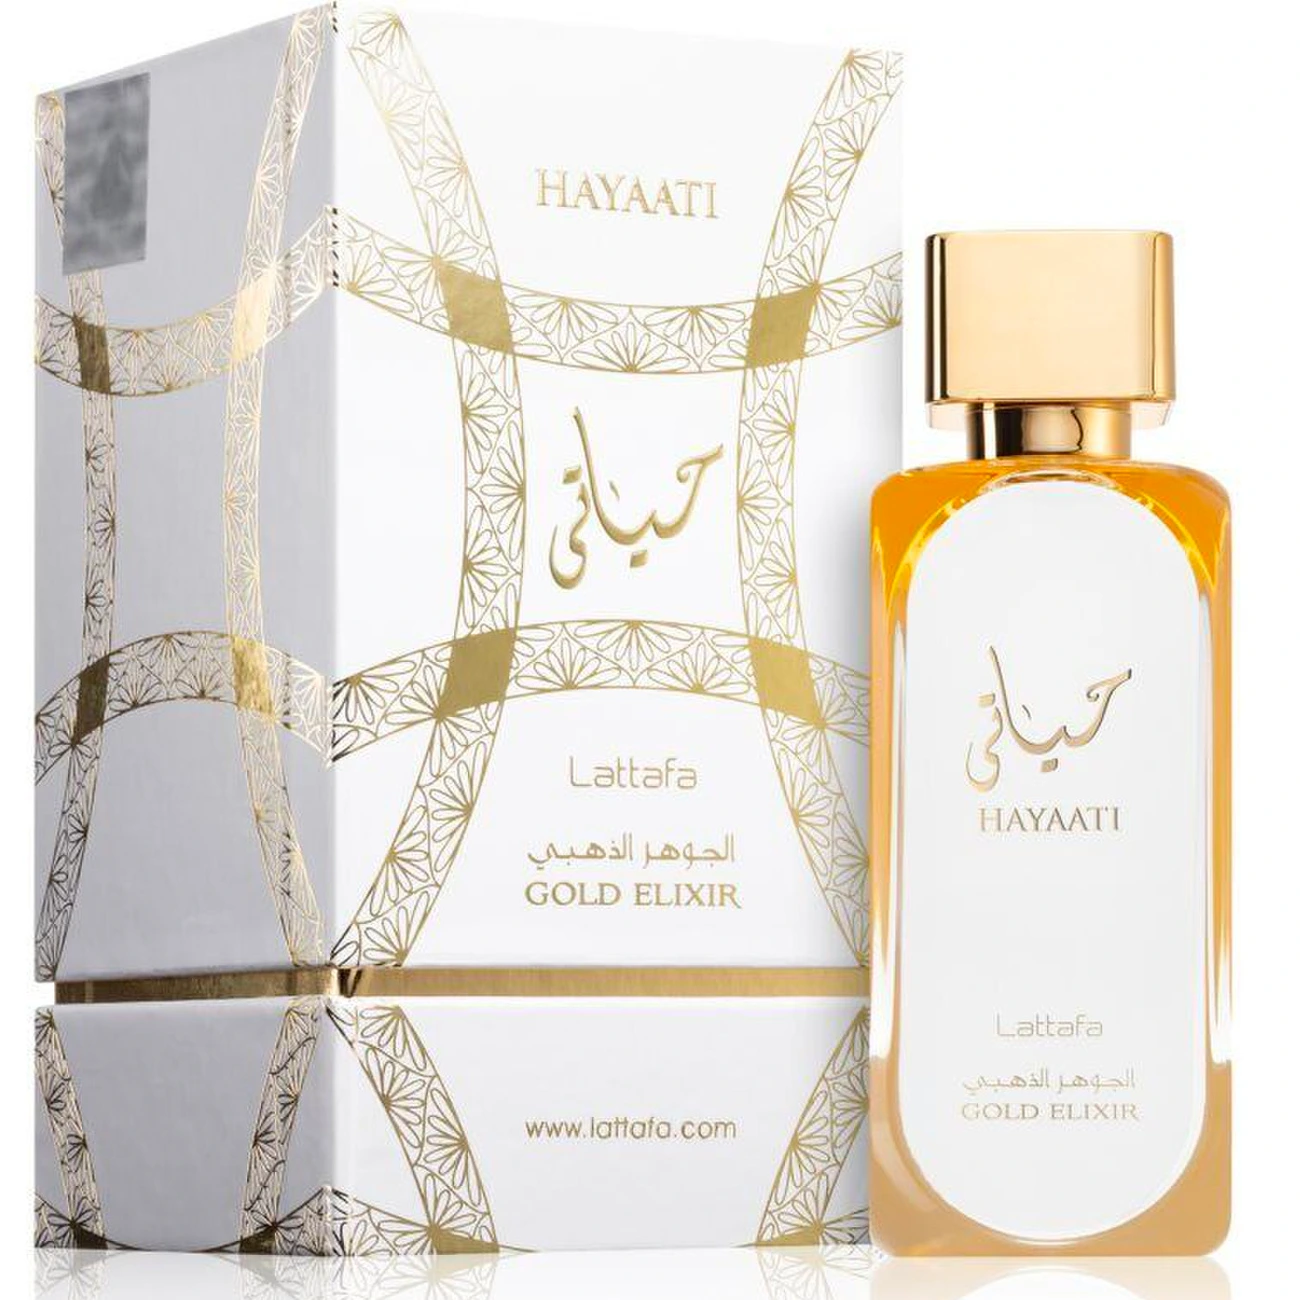 <p><em>﻿INSPIRED BY <strong>﻿</strong></em><strong>﻿ARMANI CODE PROFUMO</strong></p>
<p>Hayaati Gold Elixir, a unisex fragrance by Lattafa Perfumes, combines the sensual scents of Bergamot, Grapefruit, Cassis, Leather, Peach, Saffron, Vanilla, Amber, Musk, and Vetiver for an irresistible EDP. Enjoy the perfect balance of sophistication and elegance.</p>